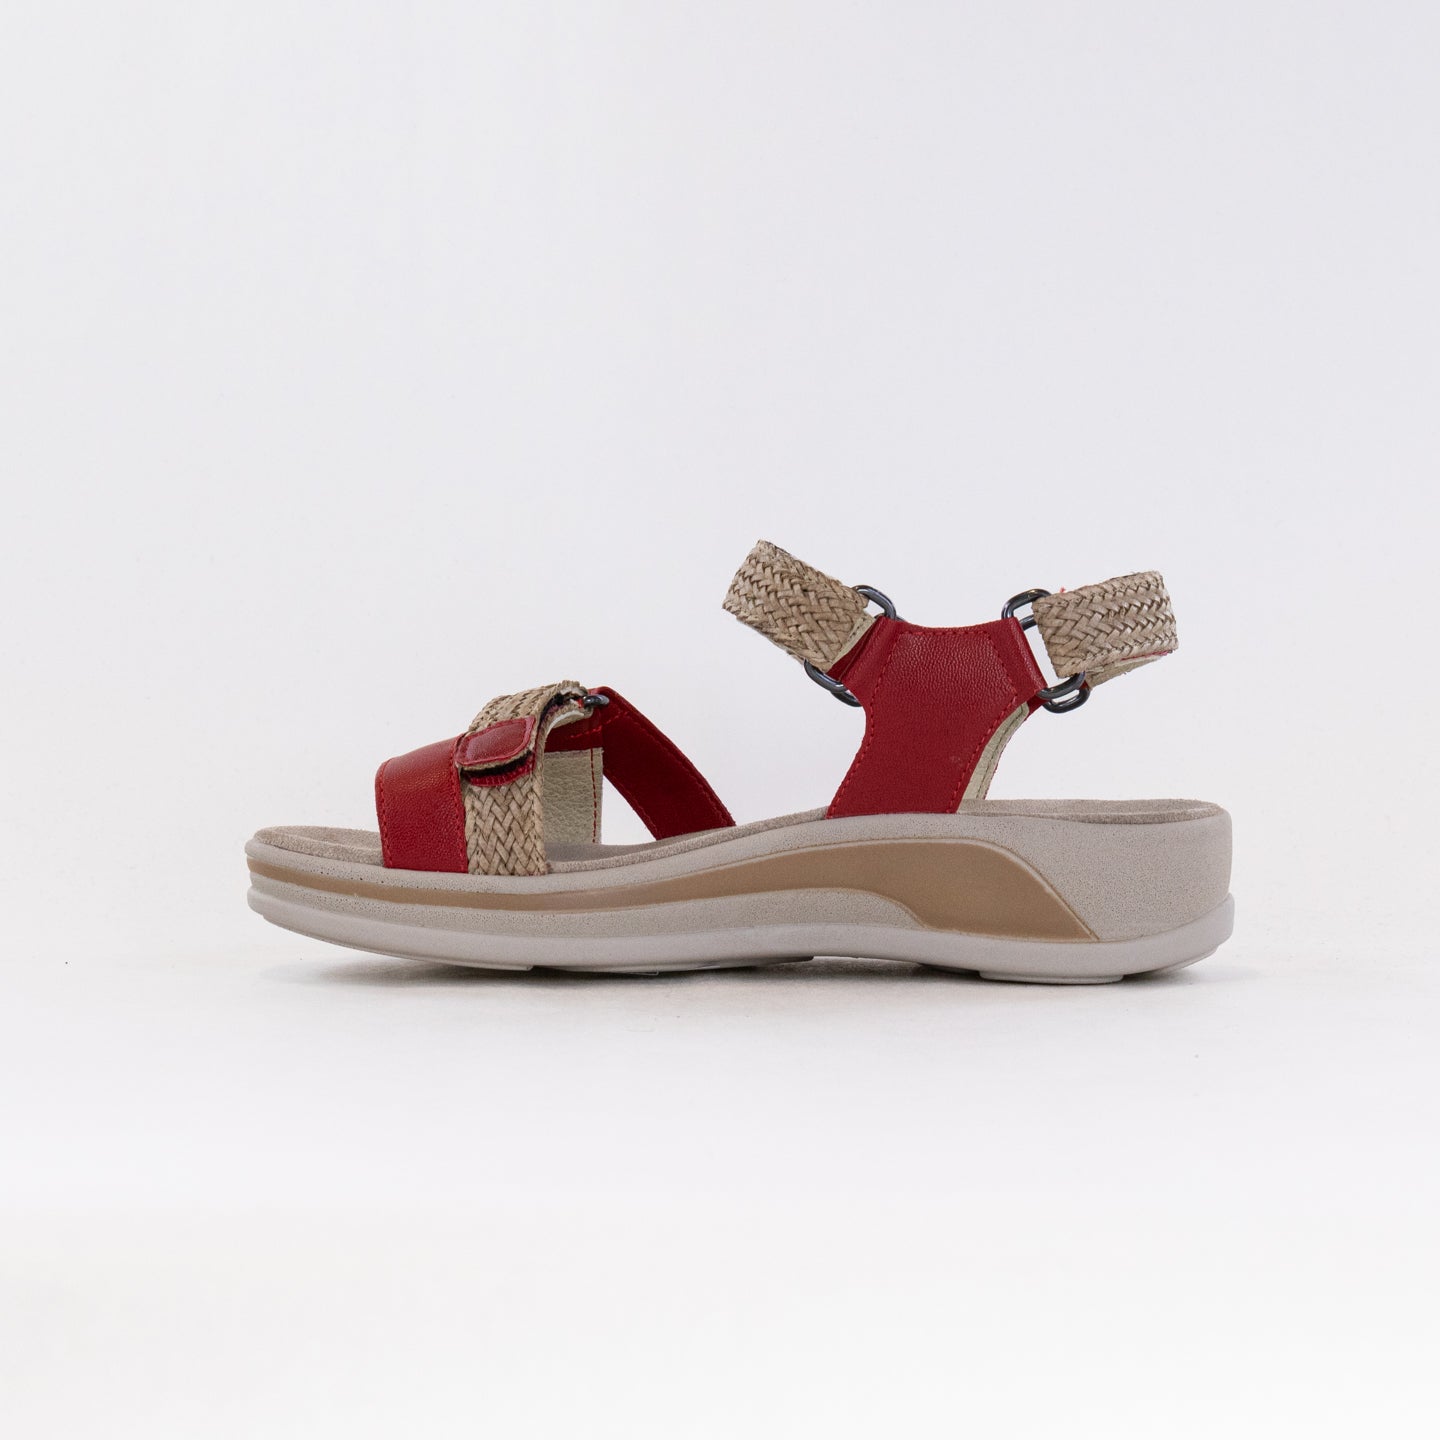 Wolky Acula (Women's) - Red